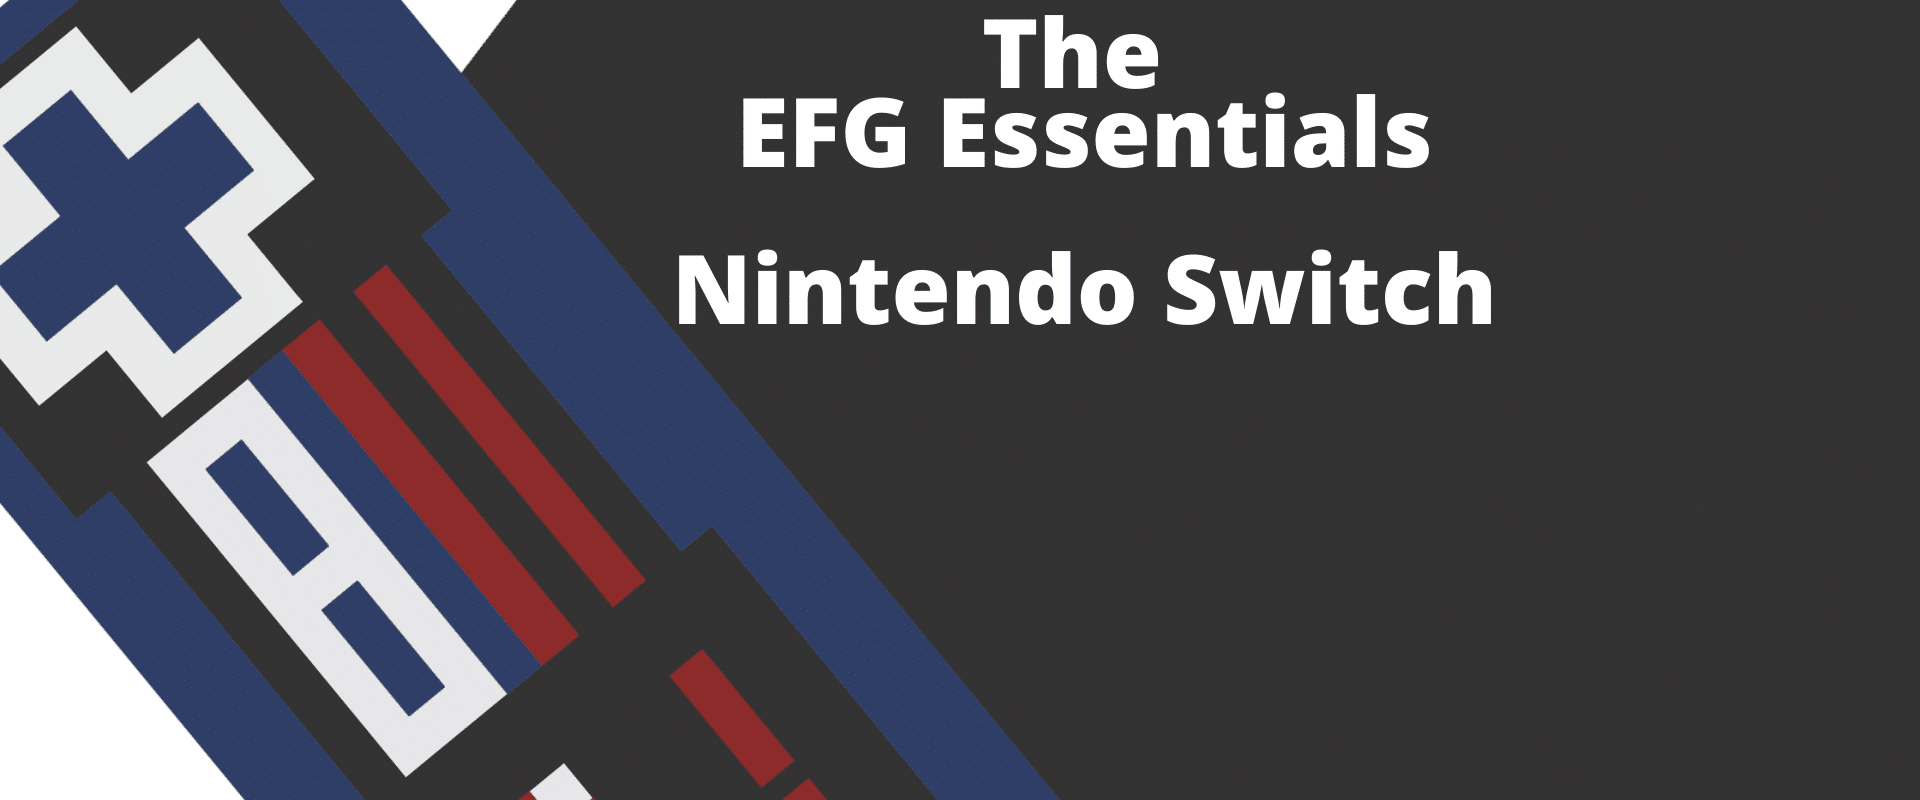 A rectangular image with a stylized image of a controller on the left and the words The EFG Essentials - nintendo switch on the right